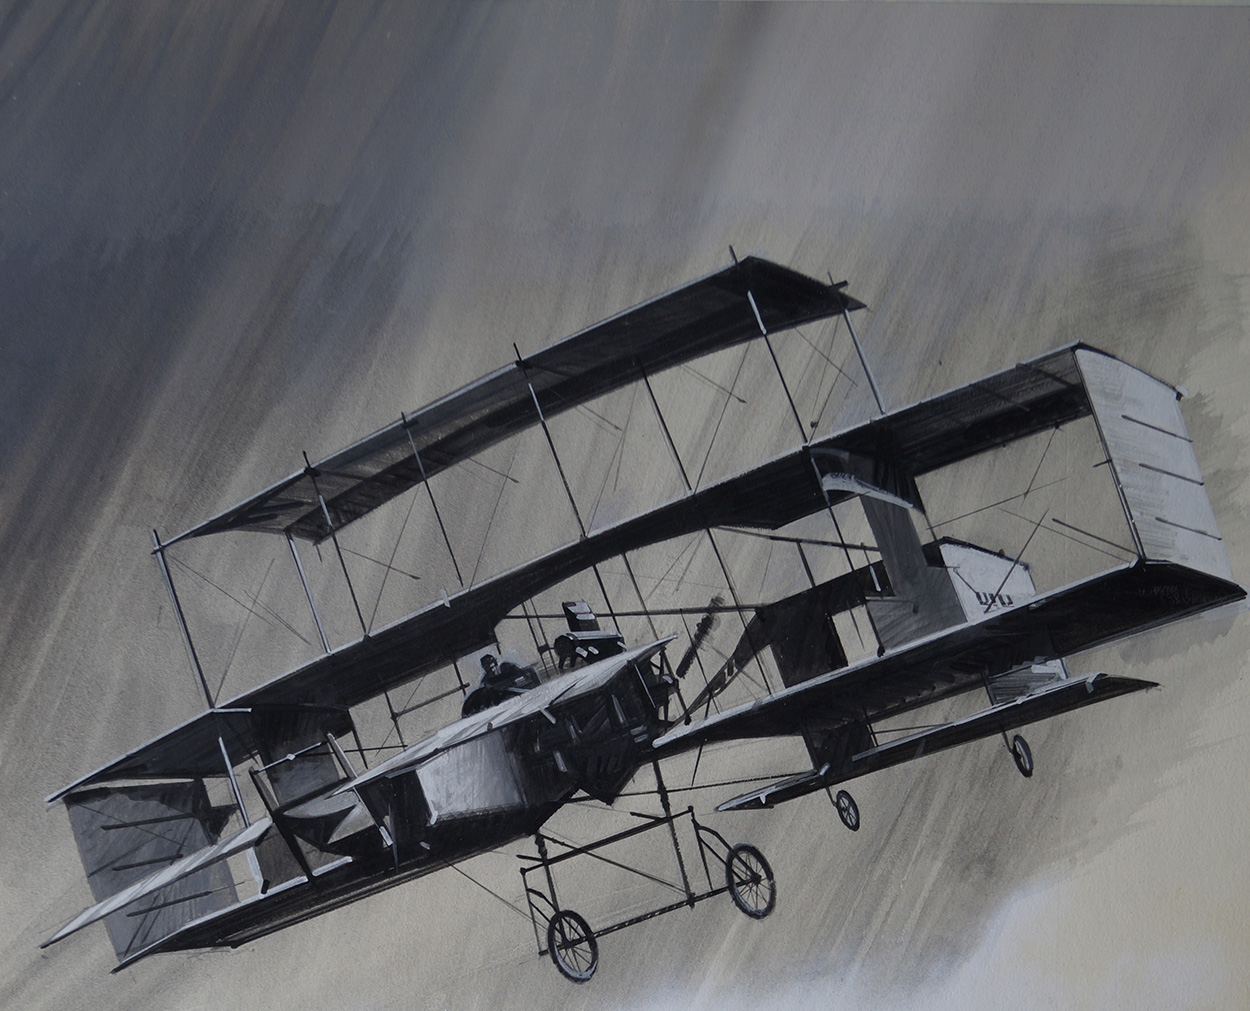 John Moore-Brabazon, the first Englishman to fly in England (Original) art by Ray Calloway at The Illustration Art Gallery